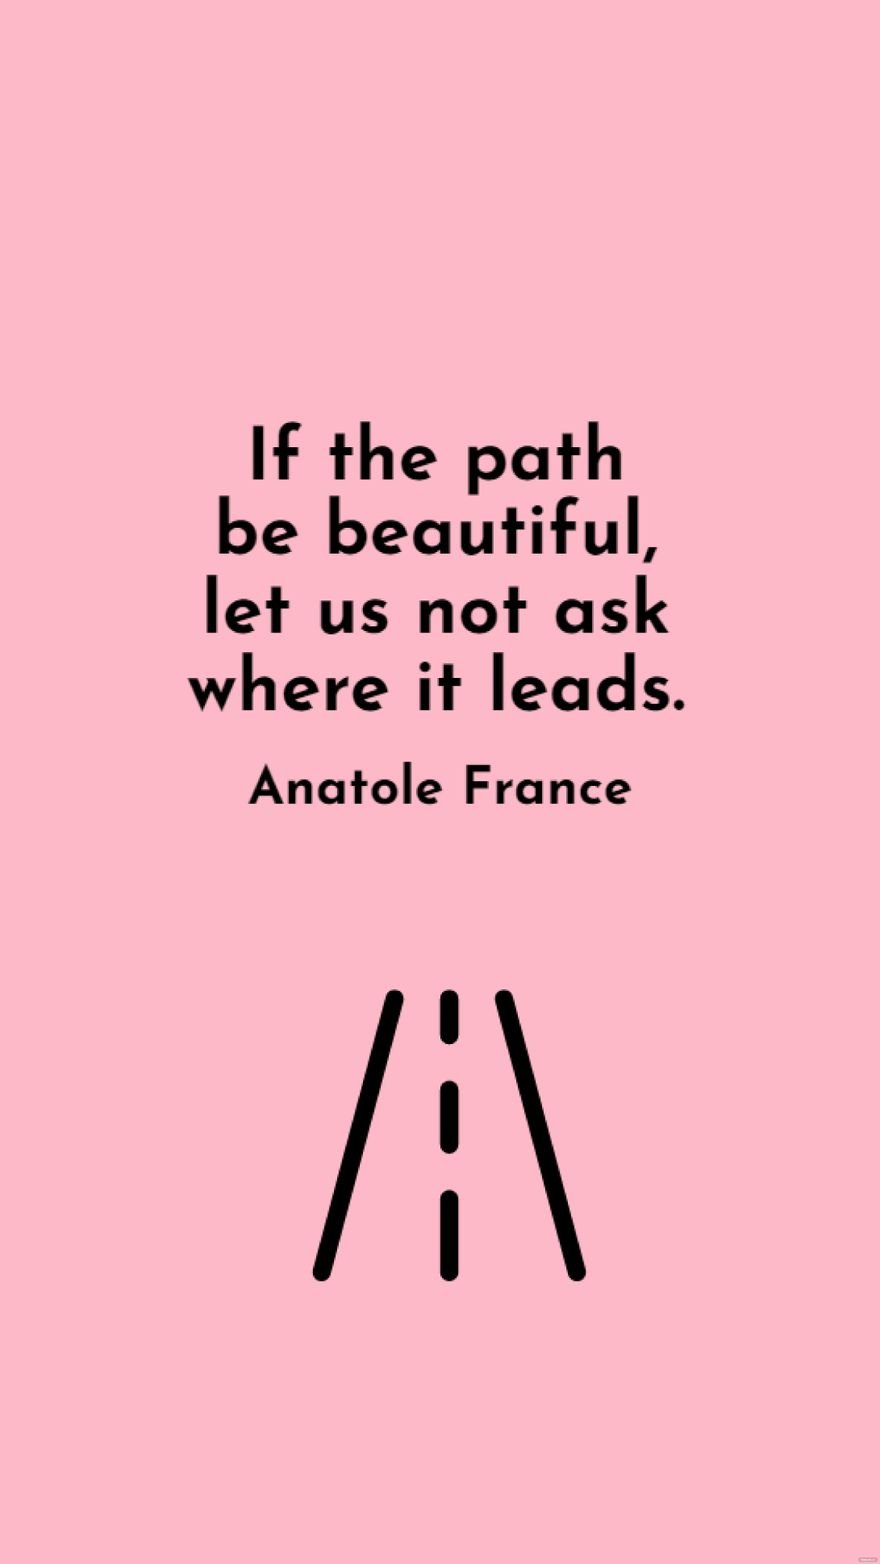 Anatole France - If the path be beautiful, let us not ask where it leads. in JPG